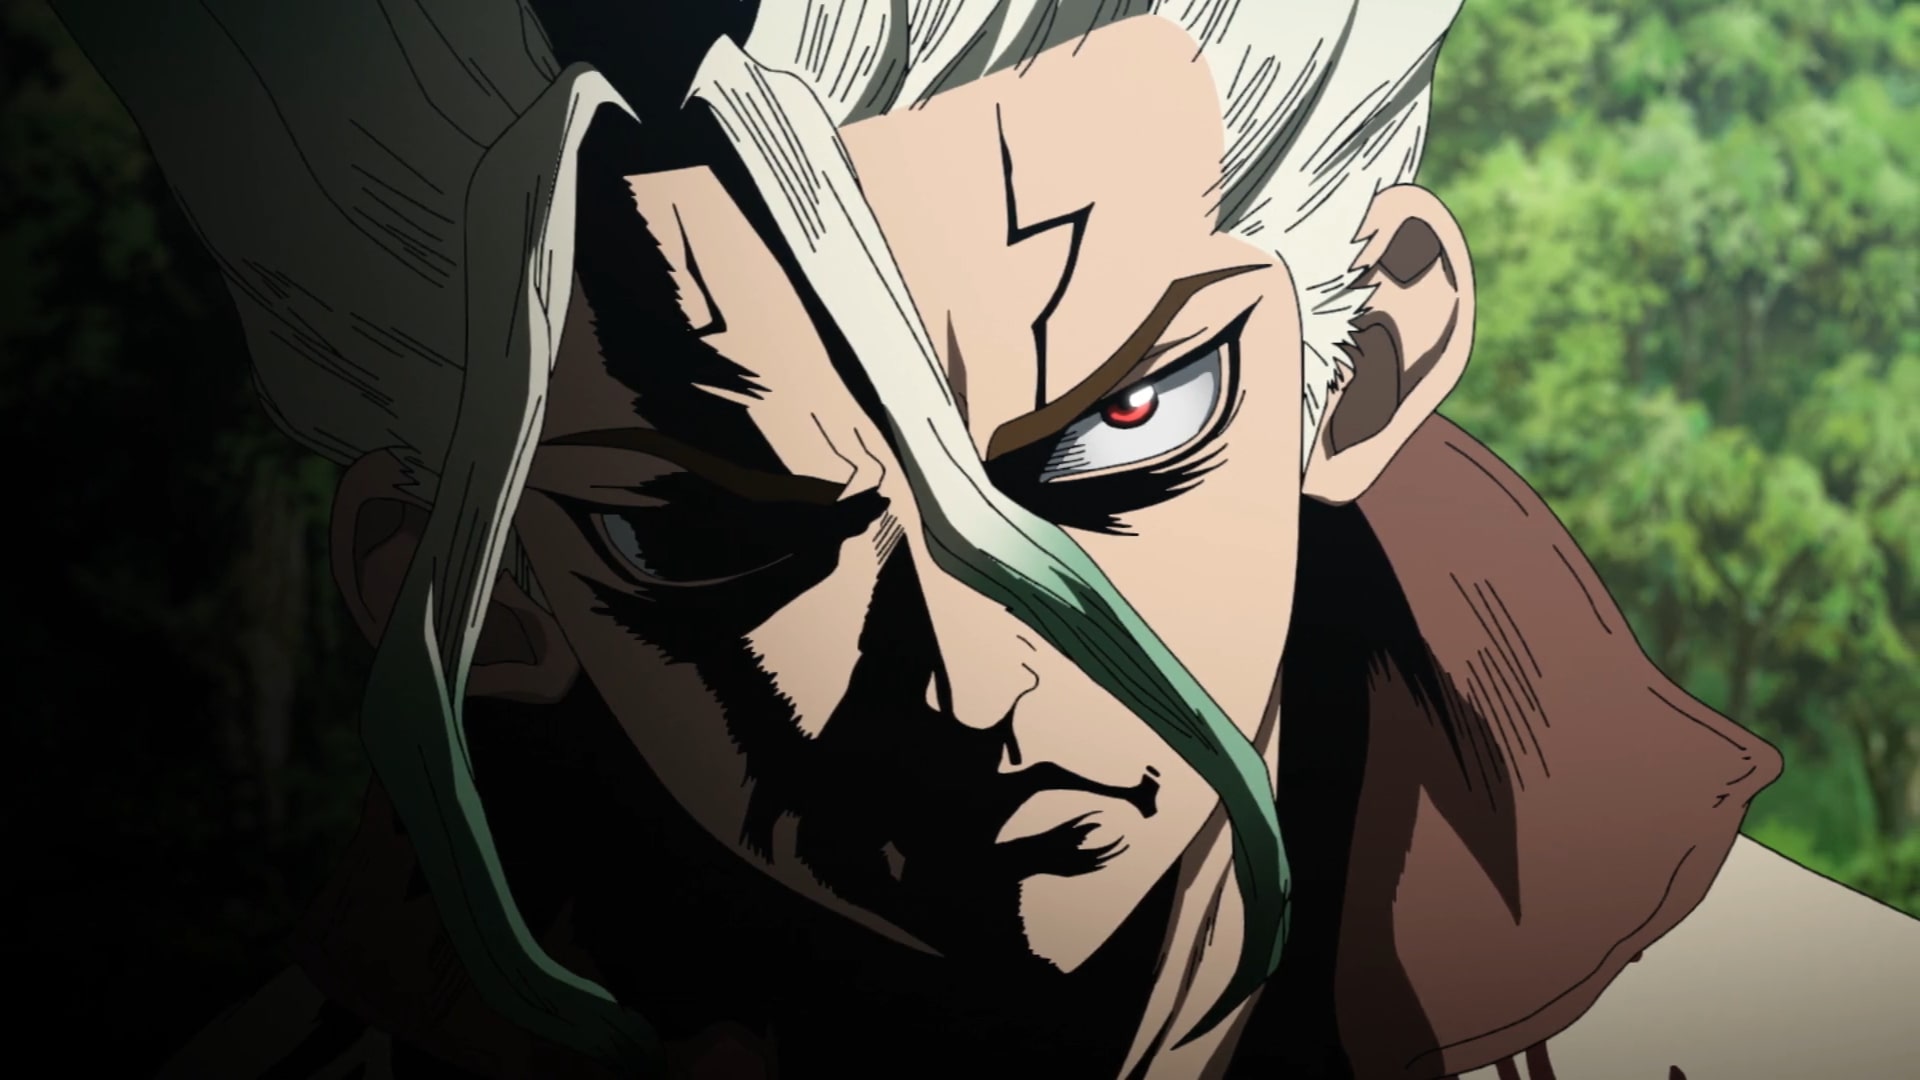 Dr. Stone: New World Episode 7 Recap: Ray of Despair, Ray of Hope